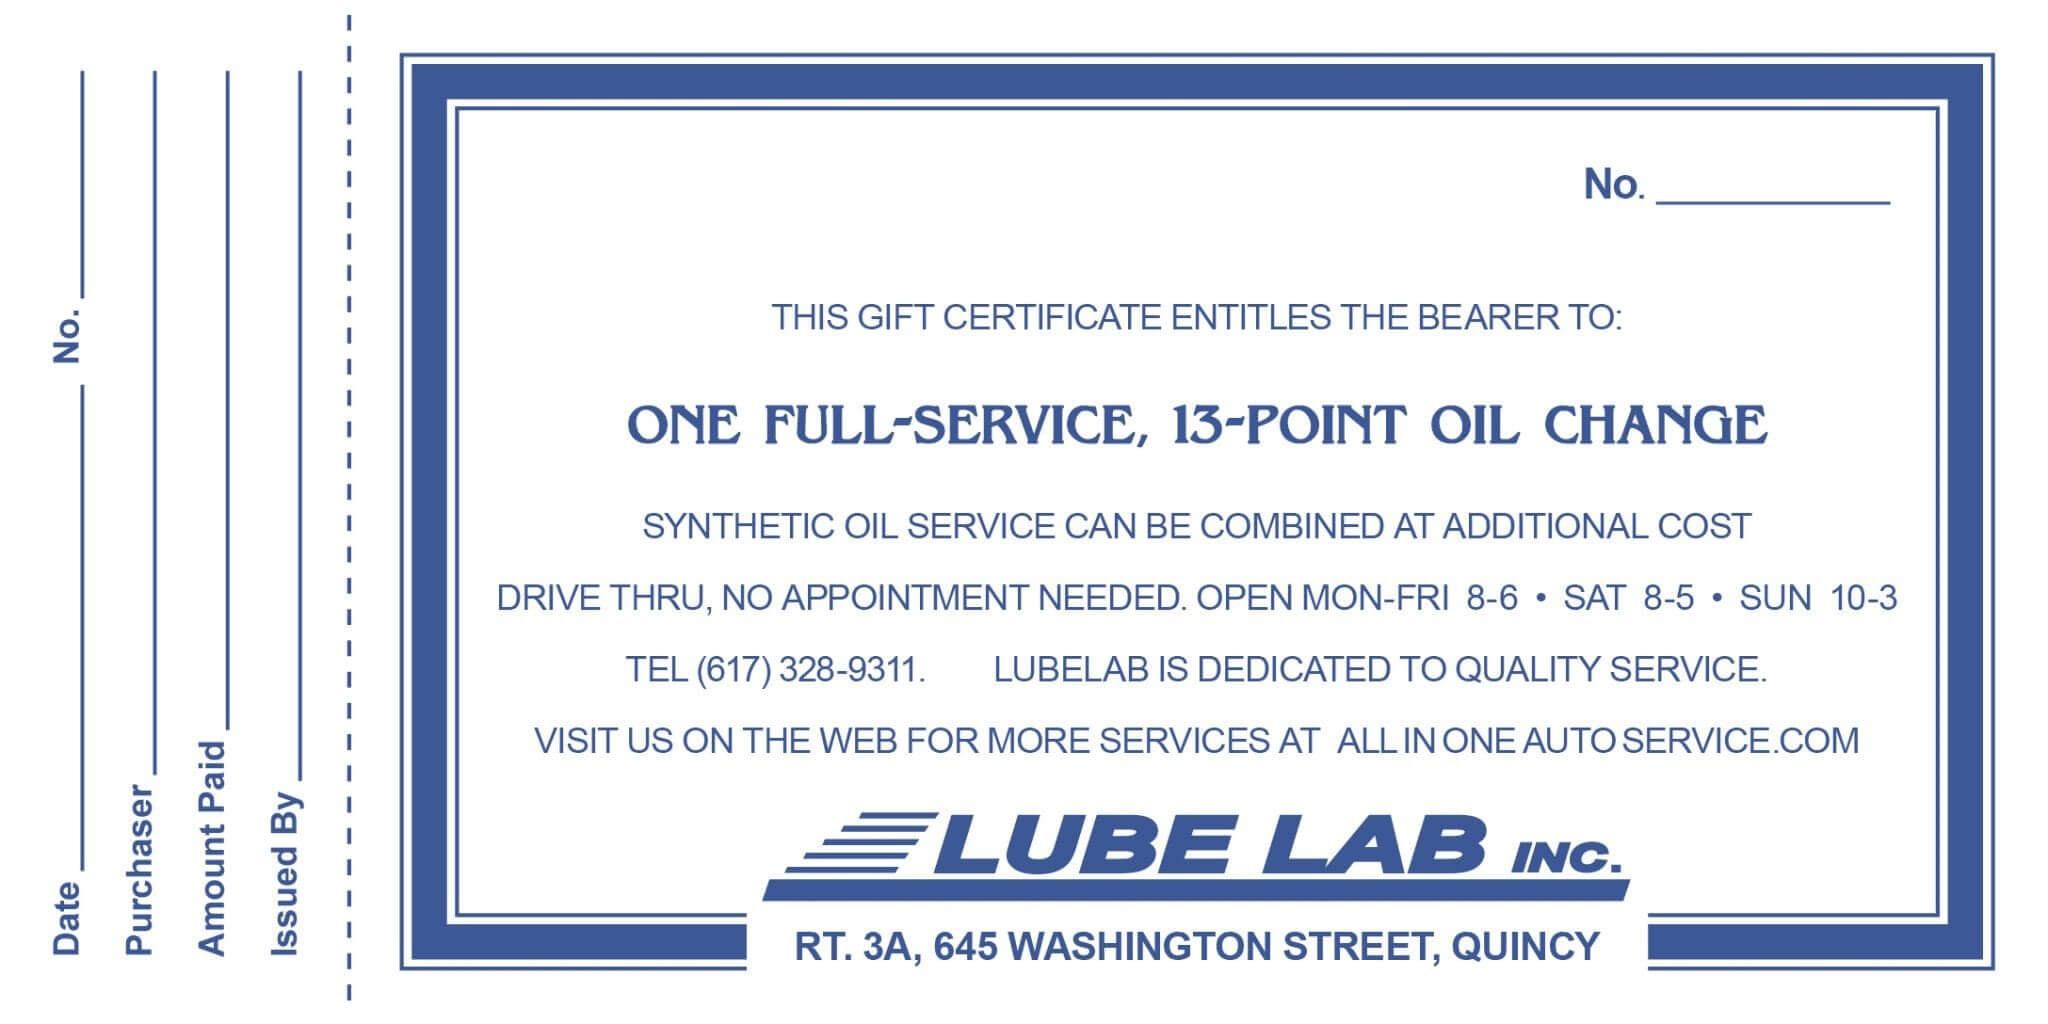 Full Service, 13 Point Oil Change | All In One & Lube Lab Throughout This Certificate Entitles The Bearer To Template